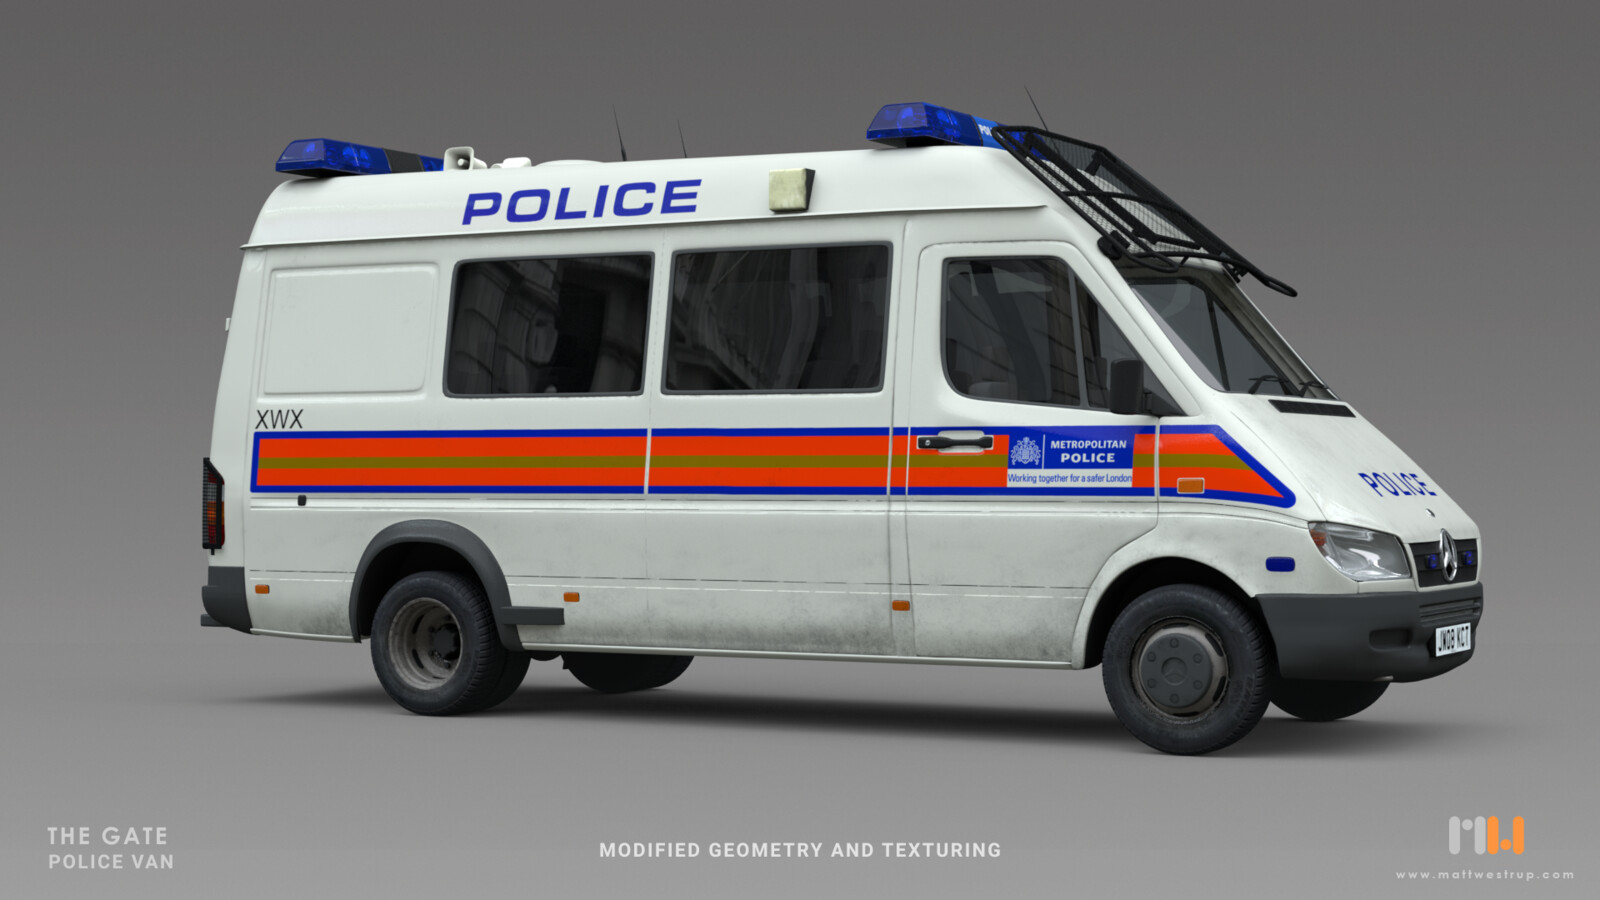 Police Van - Role: Model conversion and texture.